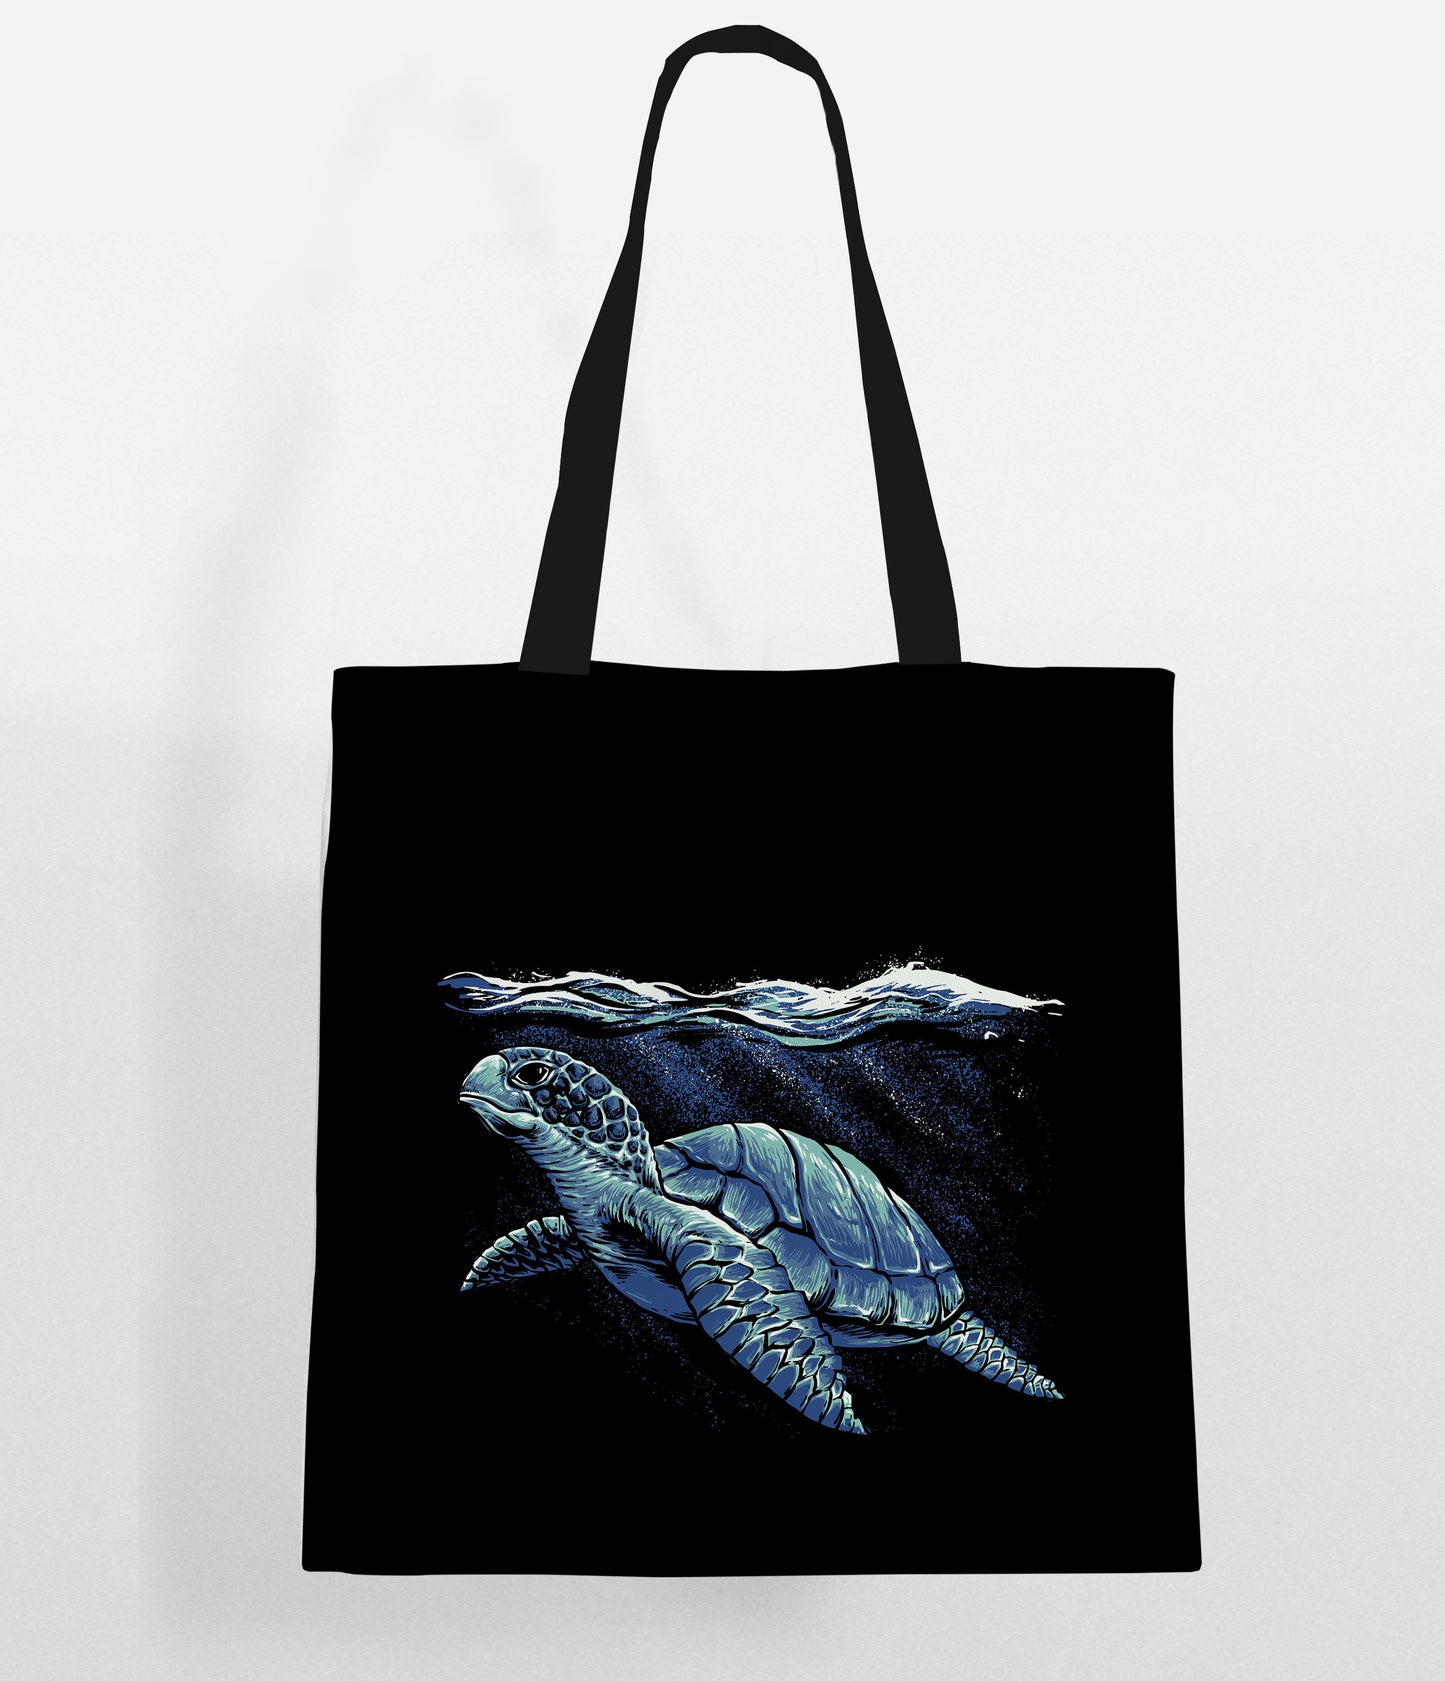 A black tote bag featuring a sea turtle image, perfect for nature enthusiasts and eco-conscious individuals.